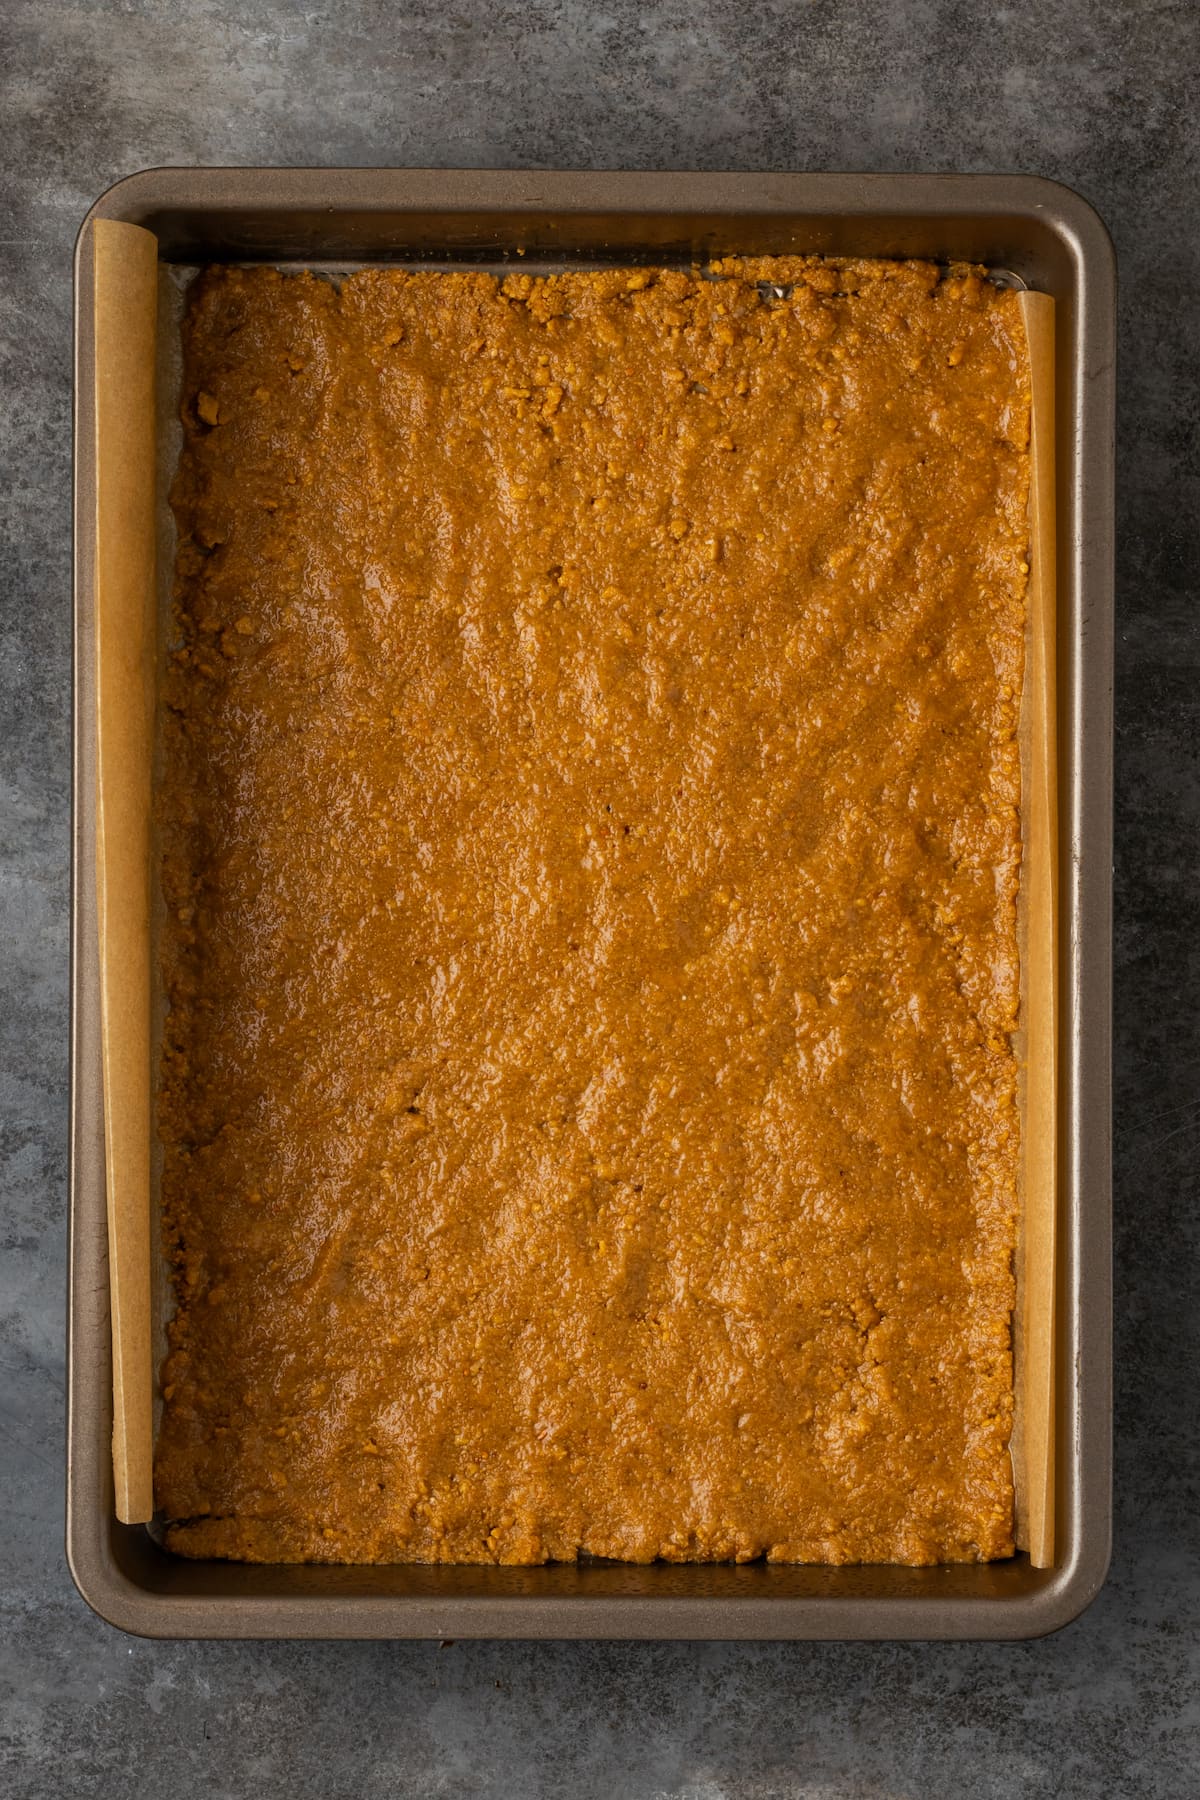 A layer of graham cracker crumbs in a lined baking pan.